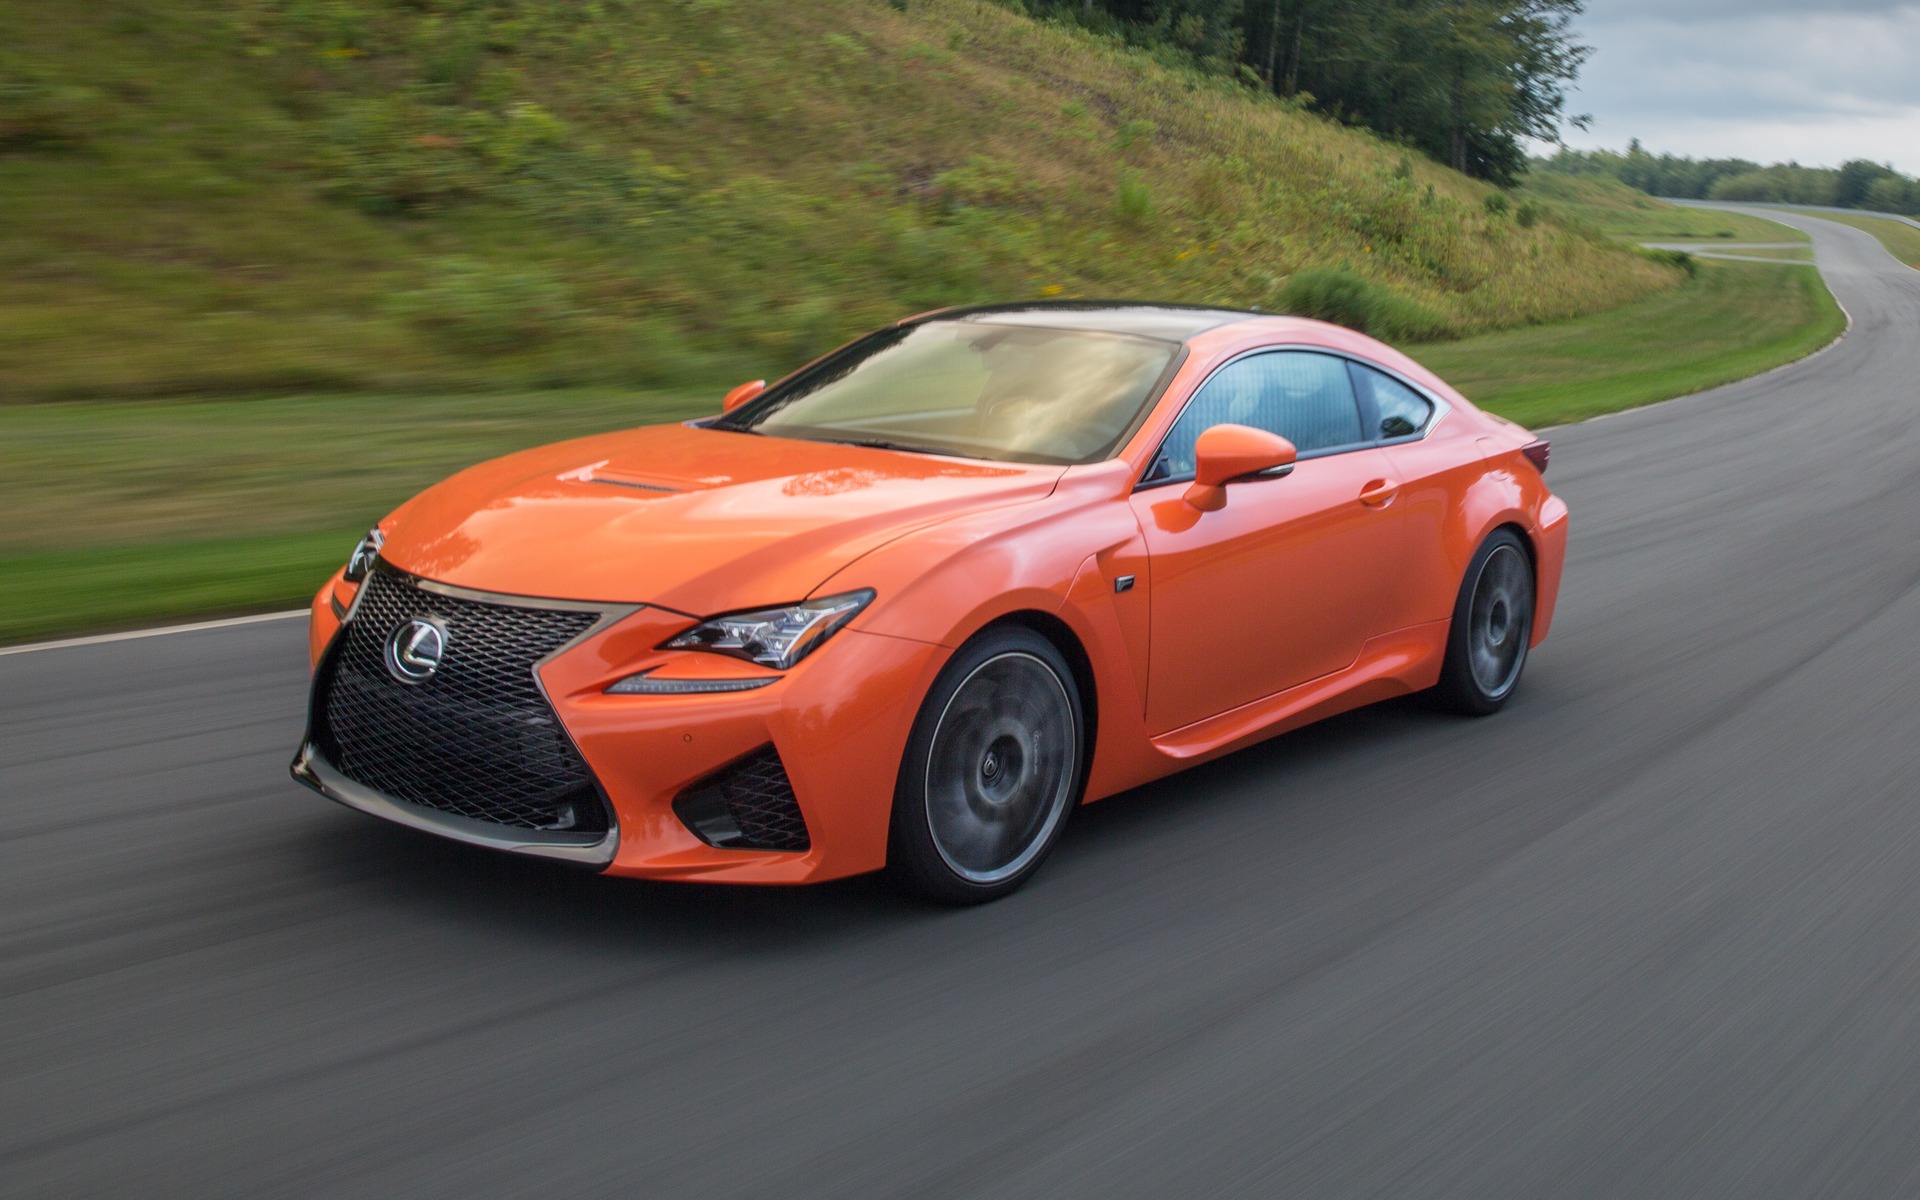 19 Lexus Rc News Reviews Picture Galleries And Videos The Car Guide